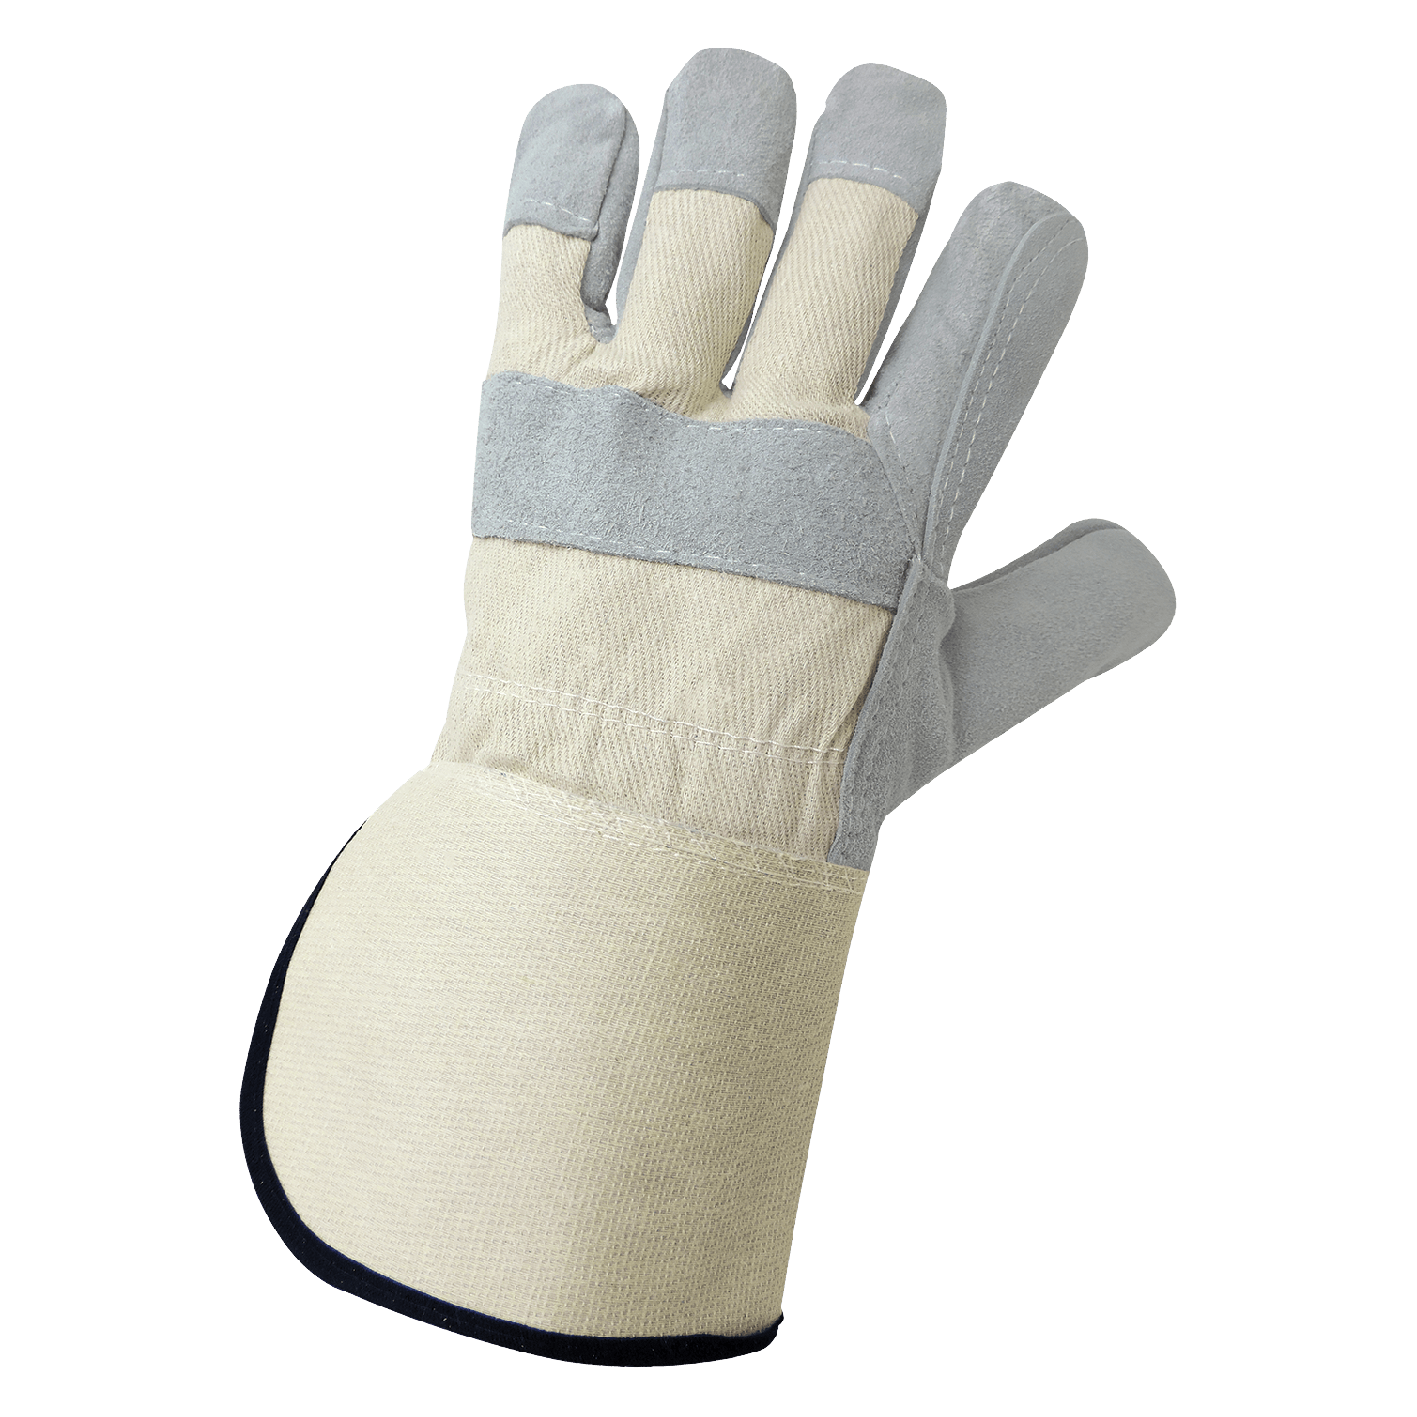 Global Industrial Gloves Market Report 2023: Sector is Expected to Reach $15.8 Billion by 2027 at a CAGR of 9.61%